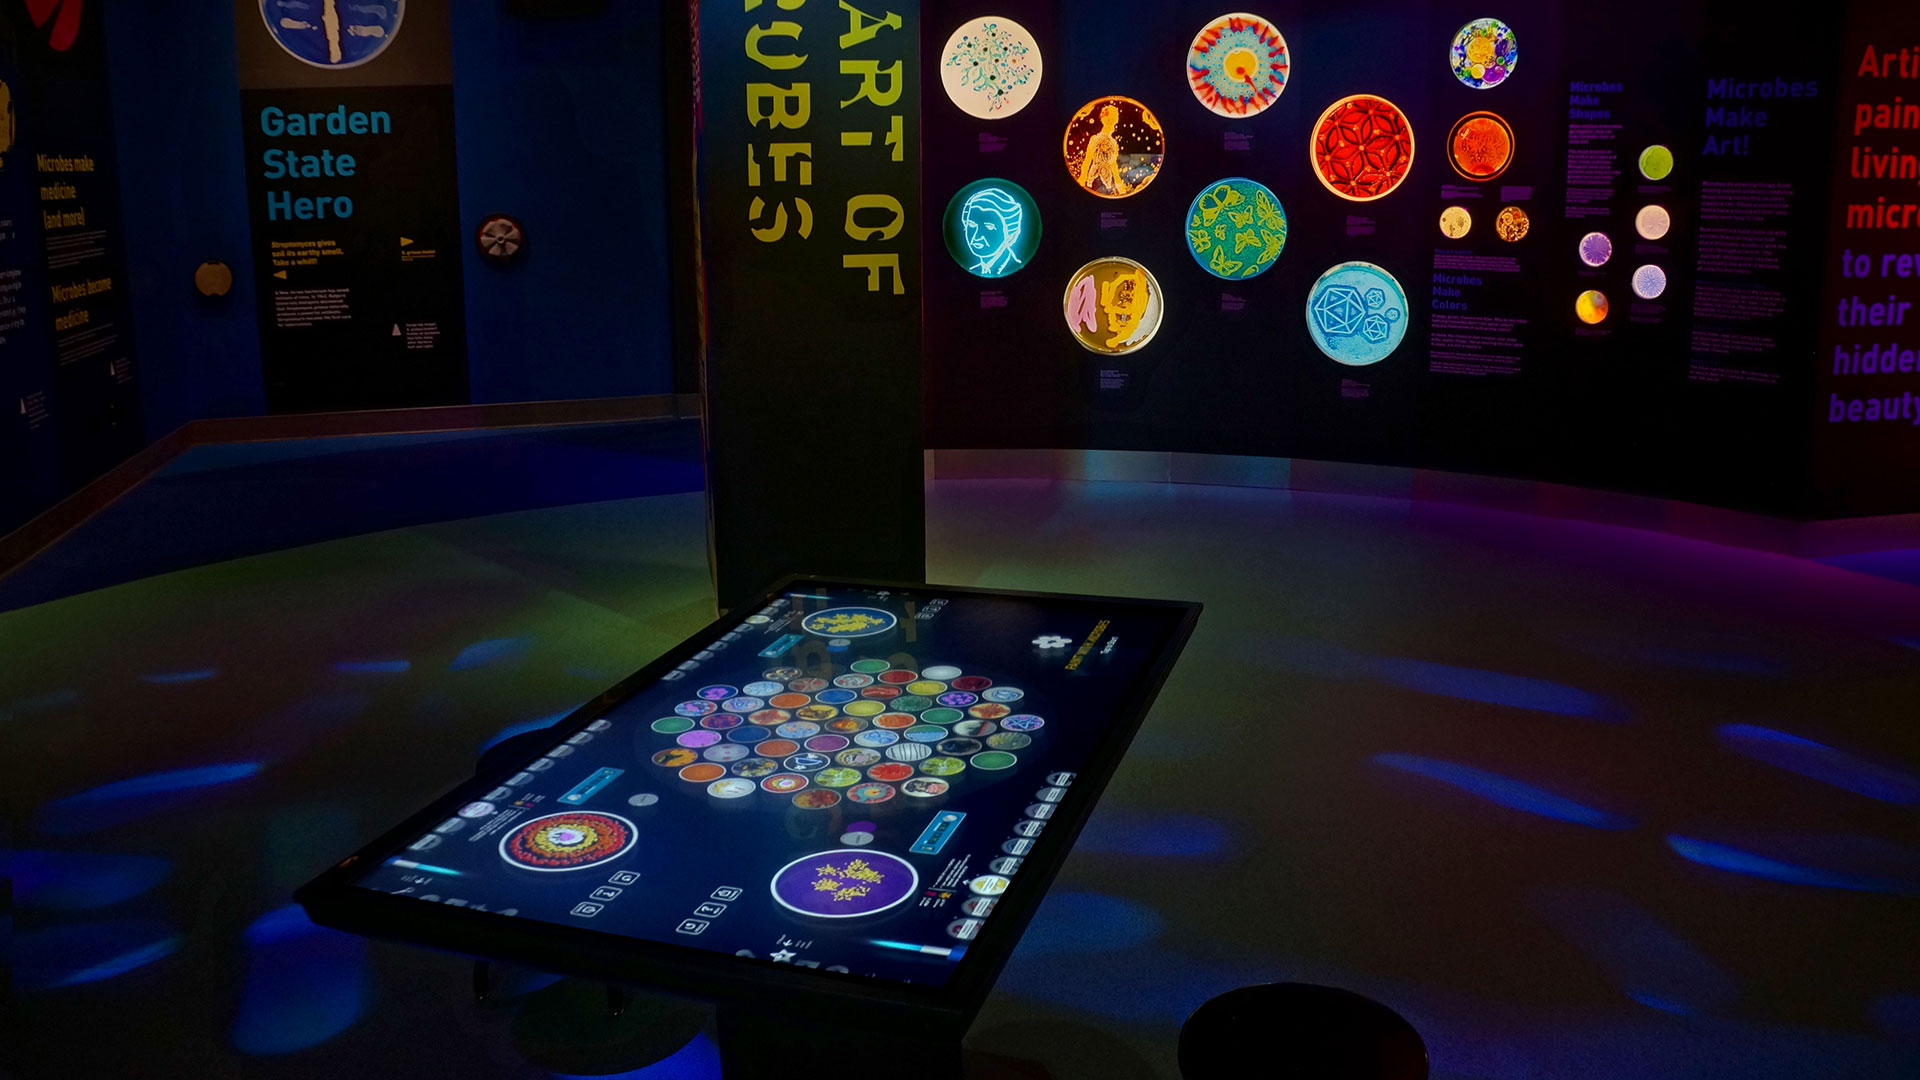 The interface design complements the illuminated microbial art samples found throughout the gallery